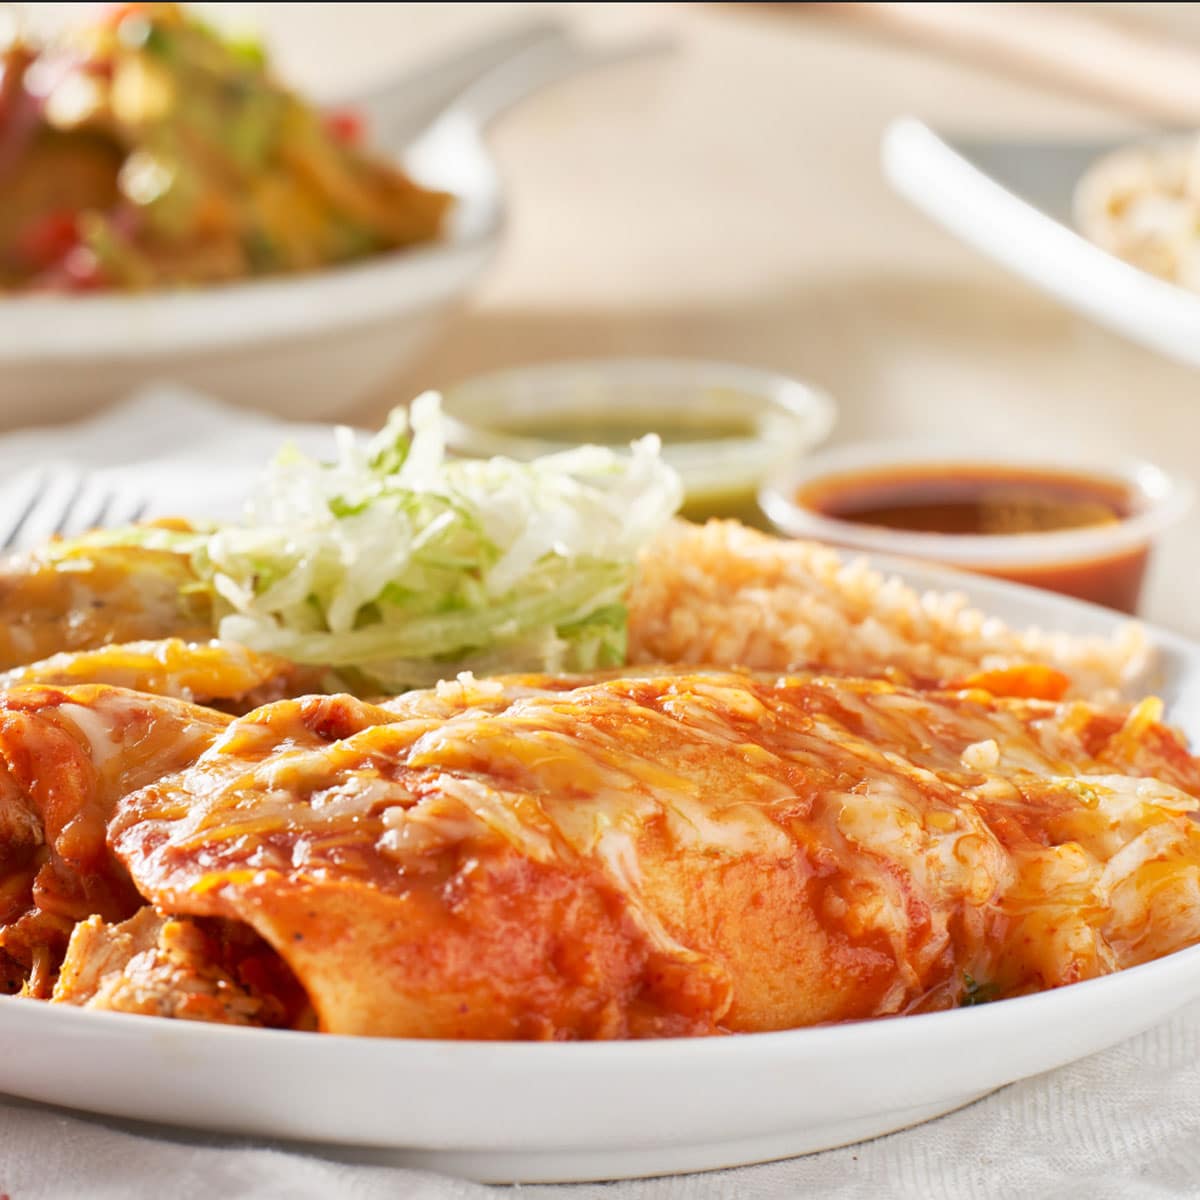 Many different types of sauces can be used for Mexican food. But which is the best? Taco sauce or enchilada sauce?